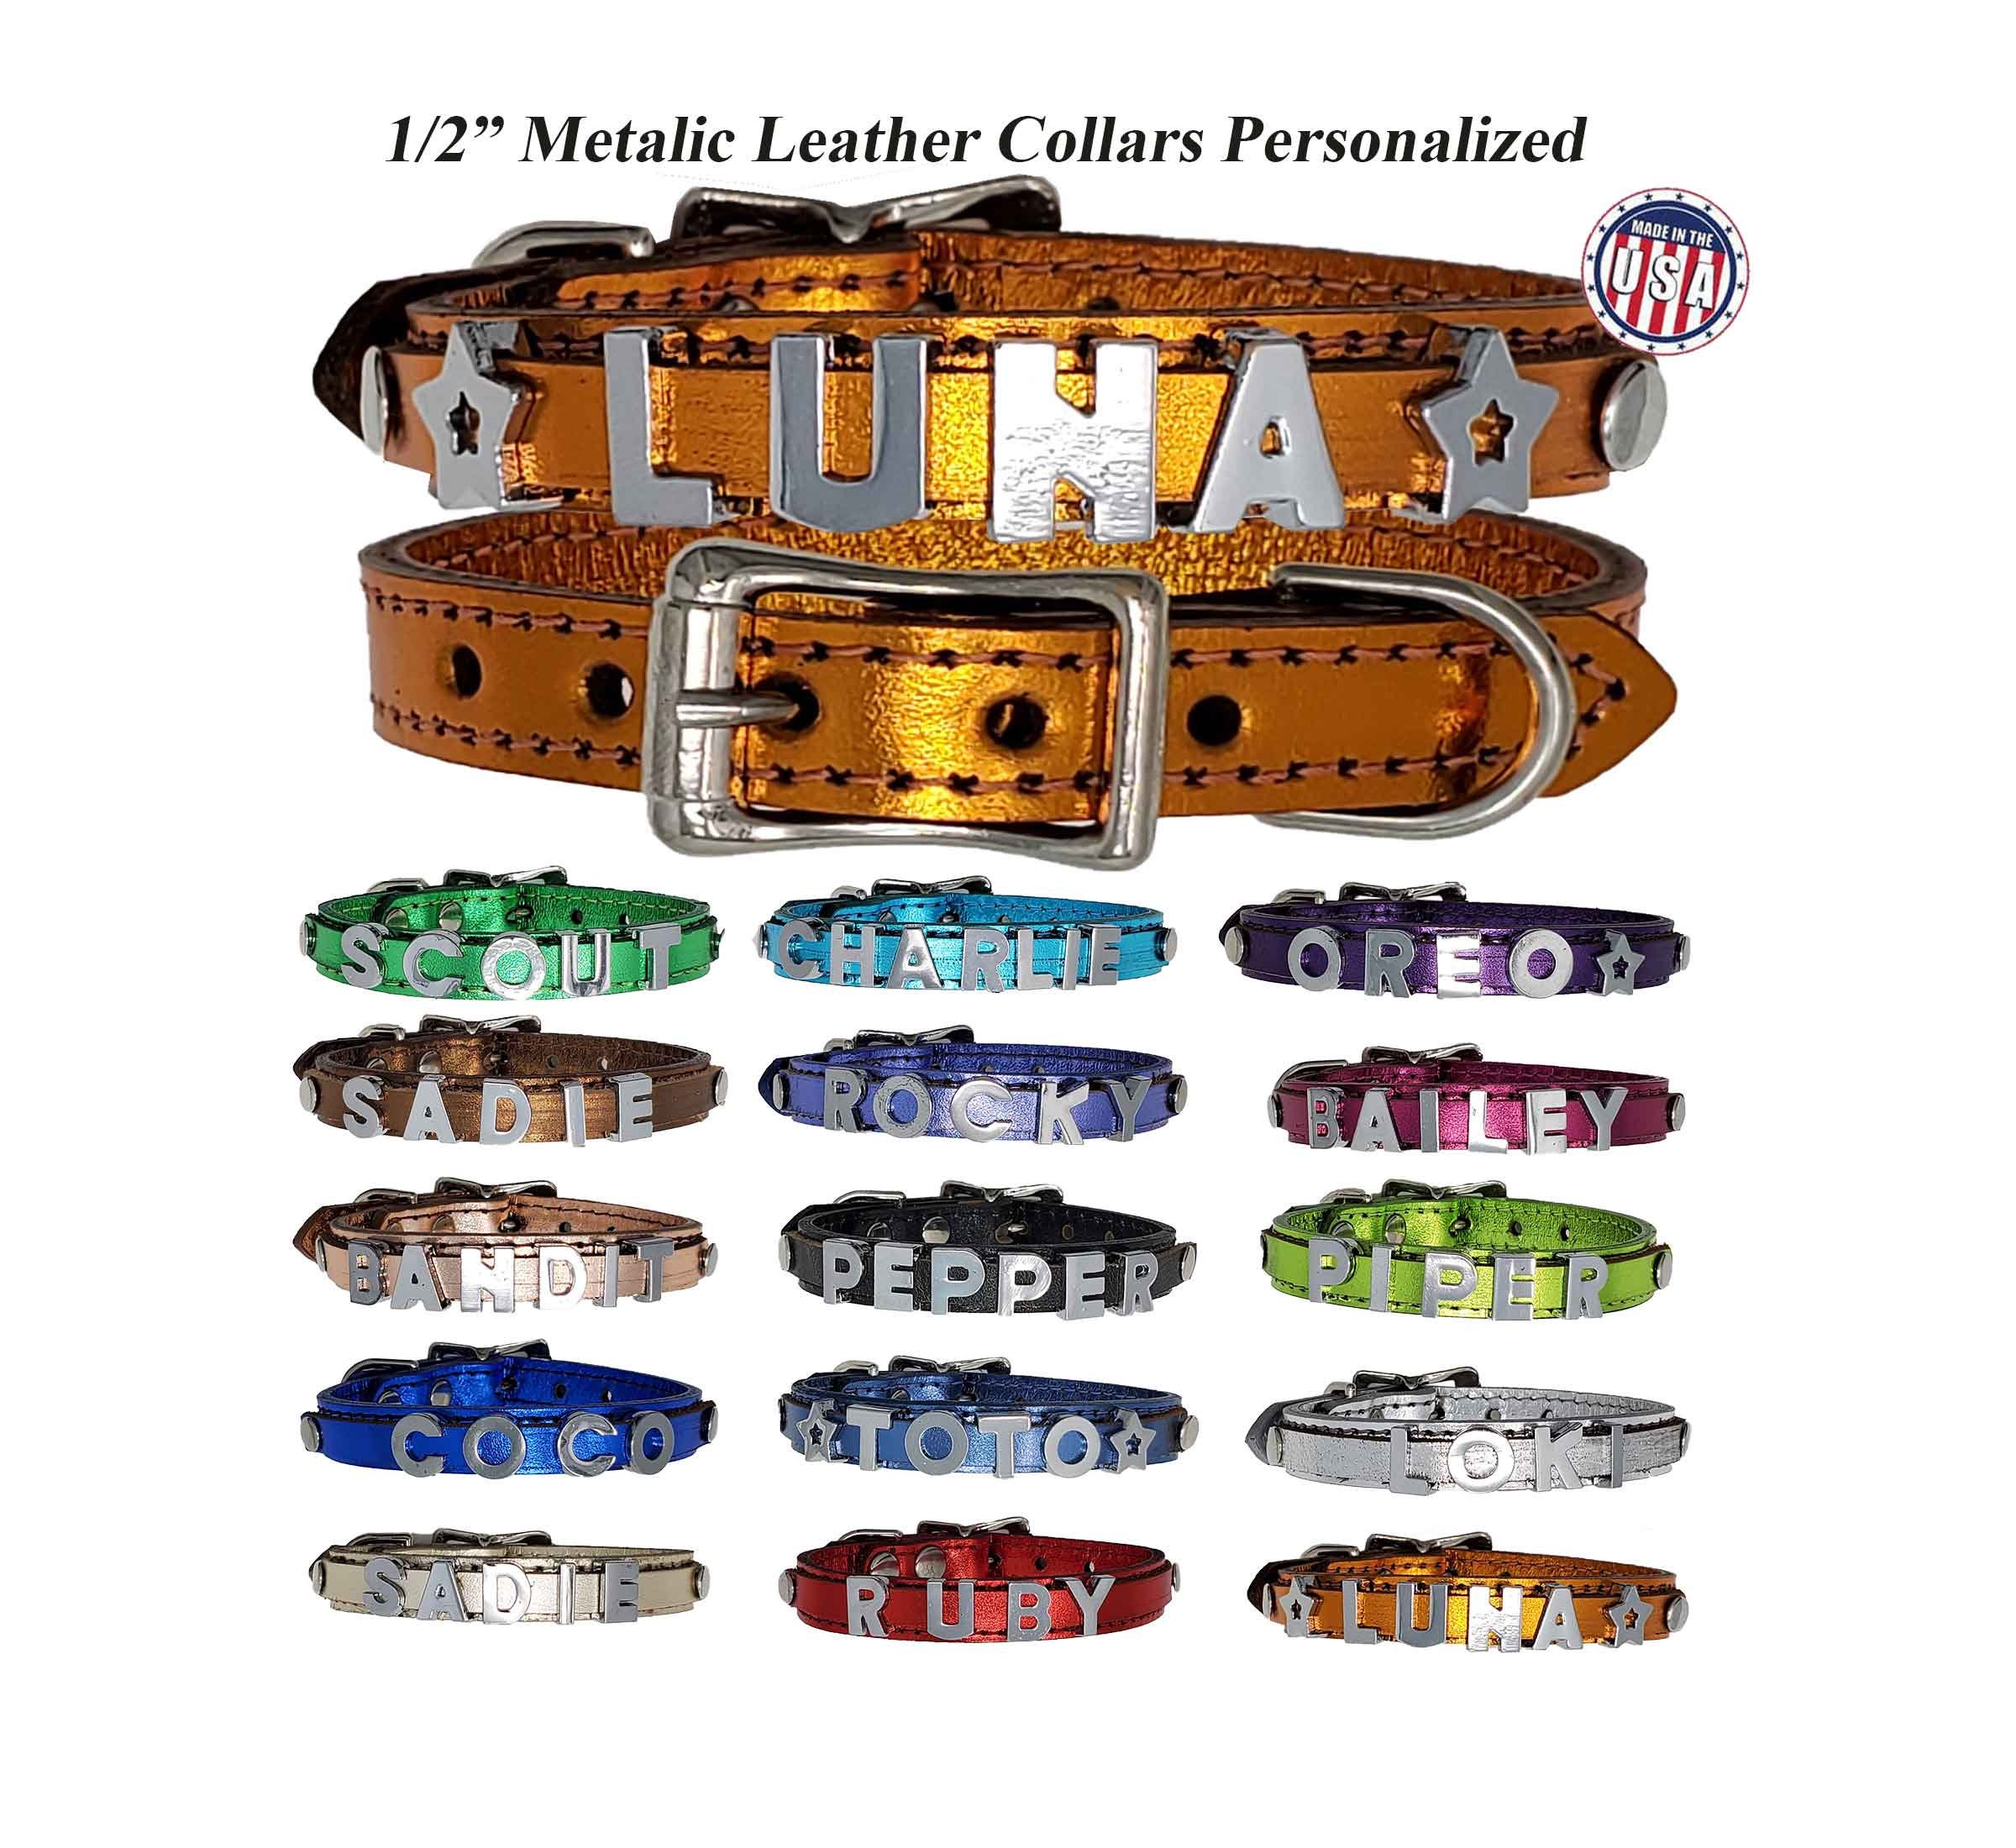 SparkleCraft Rhinestone Letter Charms 8MM/10MM DIY Pet Name Tags For Dog &  Cat Collars: A Z Alphabet + Shiny Gems From Changcaixia, $44.33